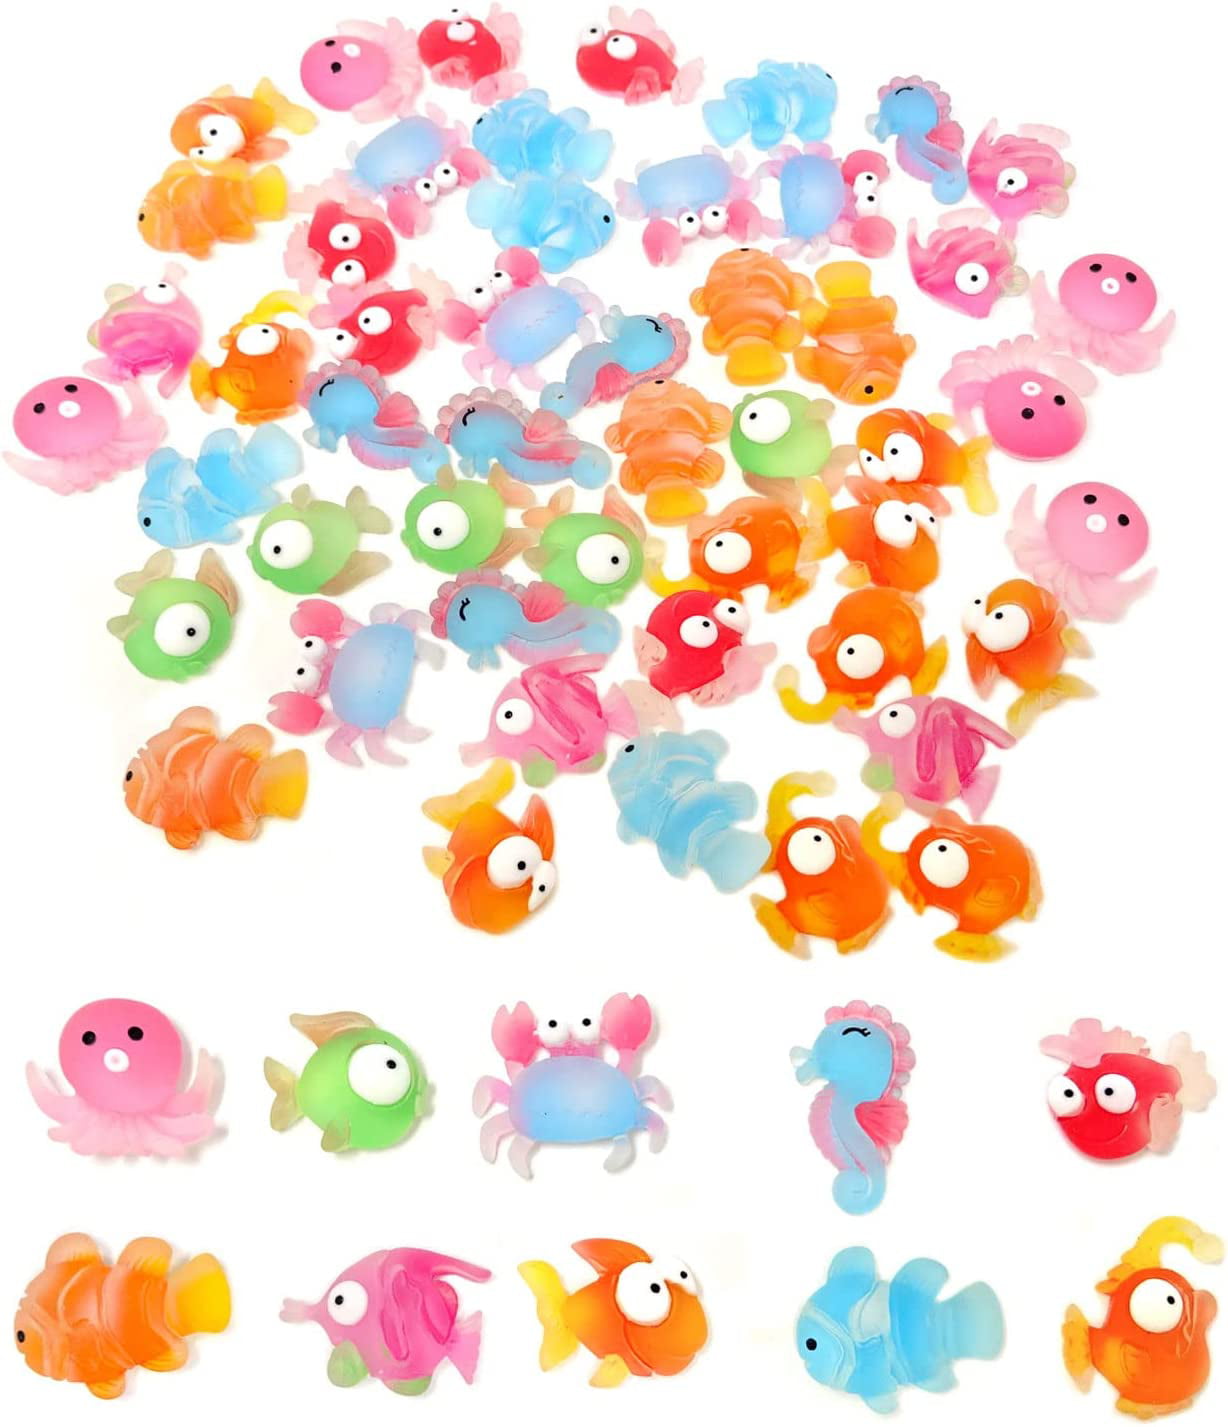 QWZNDZG 50PCS Ocean Animal Theme Flatback Slime Charms Crab Seahorse  Octopus Tropical Fish Frosted Resin Cabochons for Hair Clips Scrapbooking  Phonecase Decor Craft Making (10 Styles) 